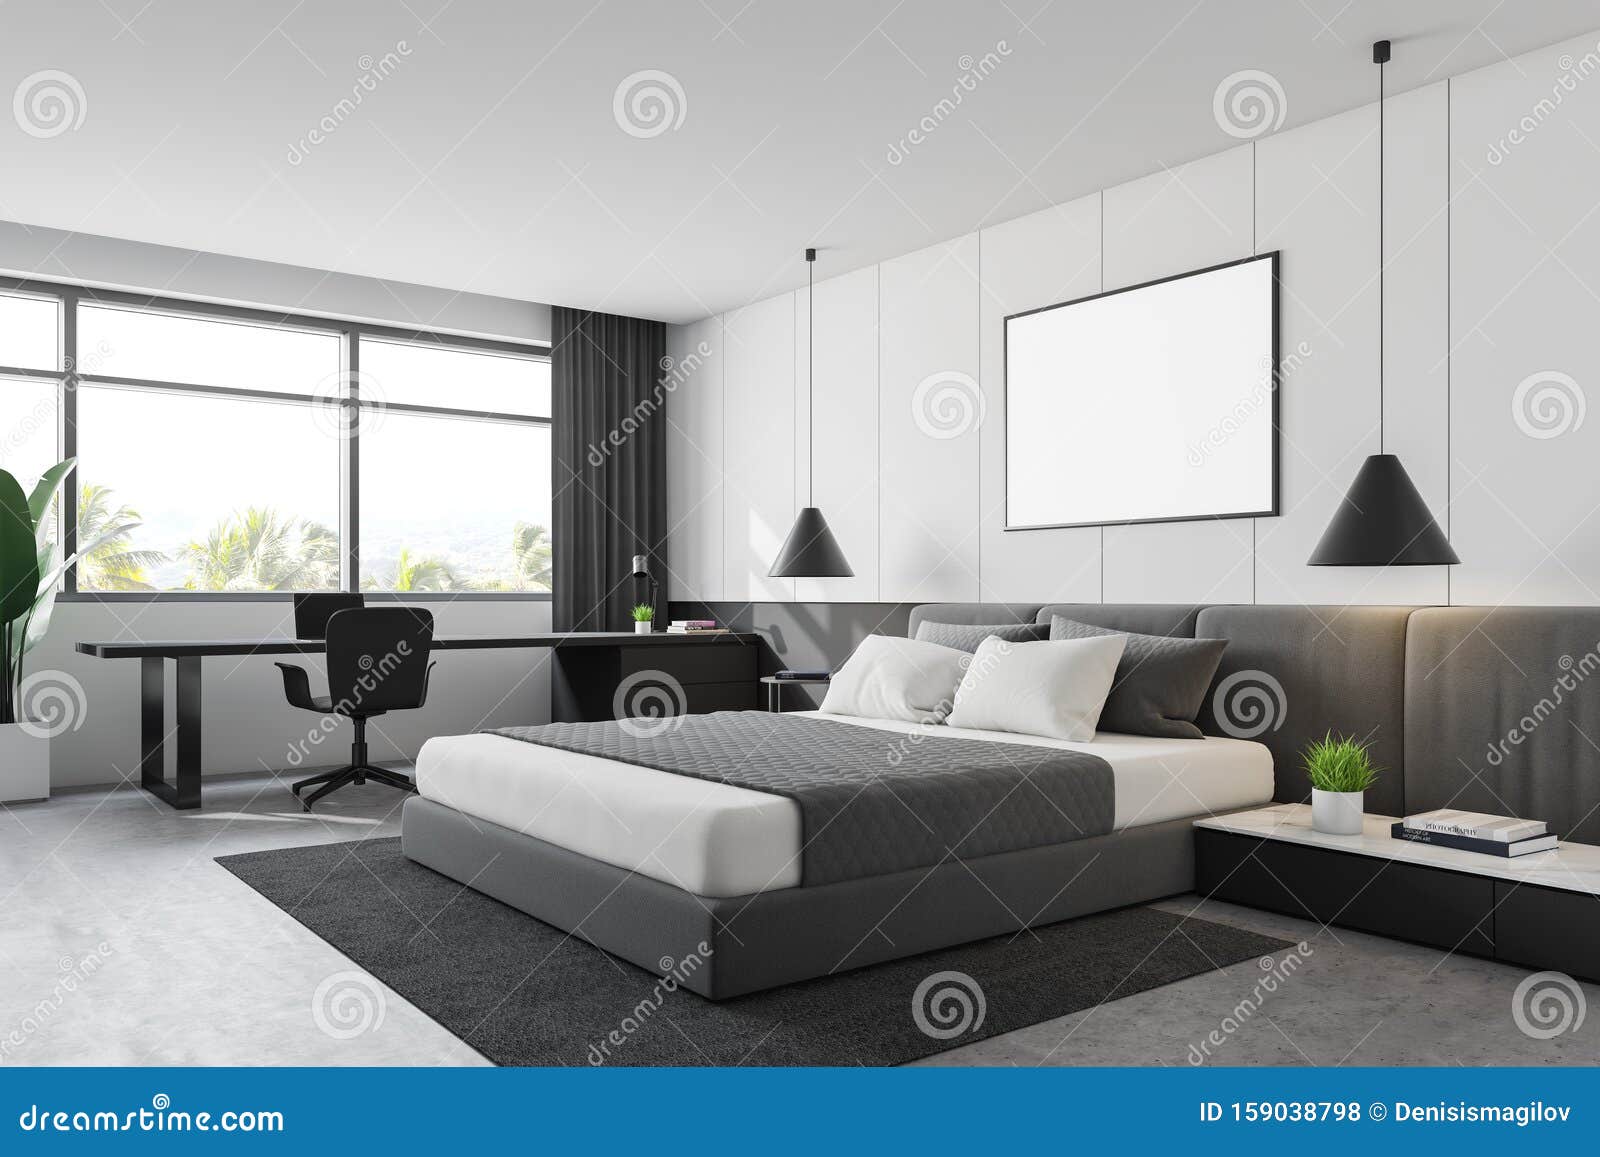 White Bedroom Corner With Home Office Stock Illustration